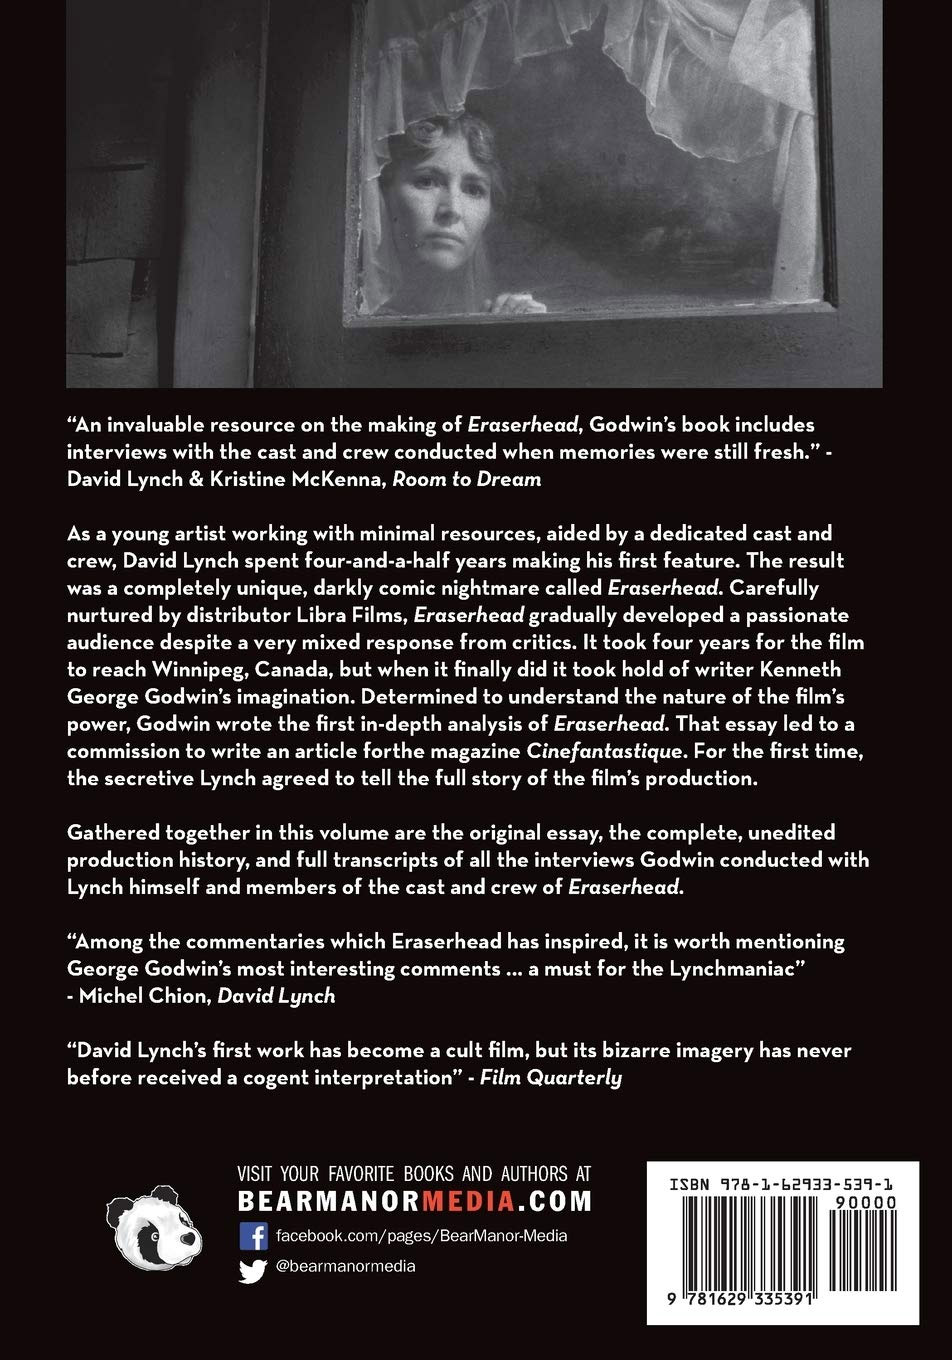 Eraserhead The David Lynch Files Vol 1: The Full Story of One of the Strangest Films Ever Made Softcover Book - Click Image to Close